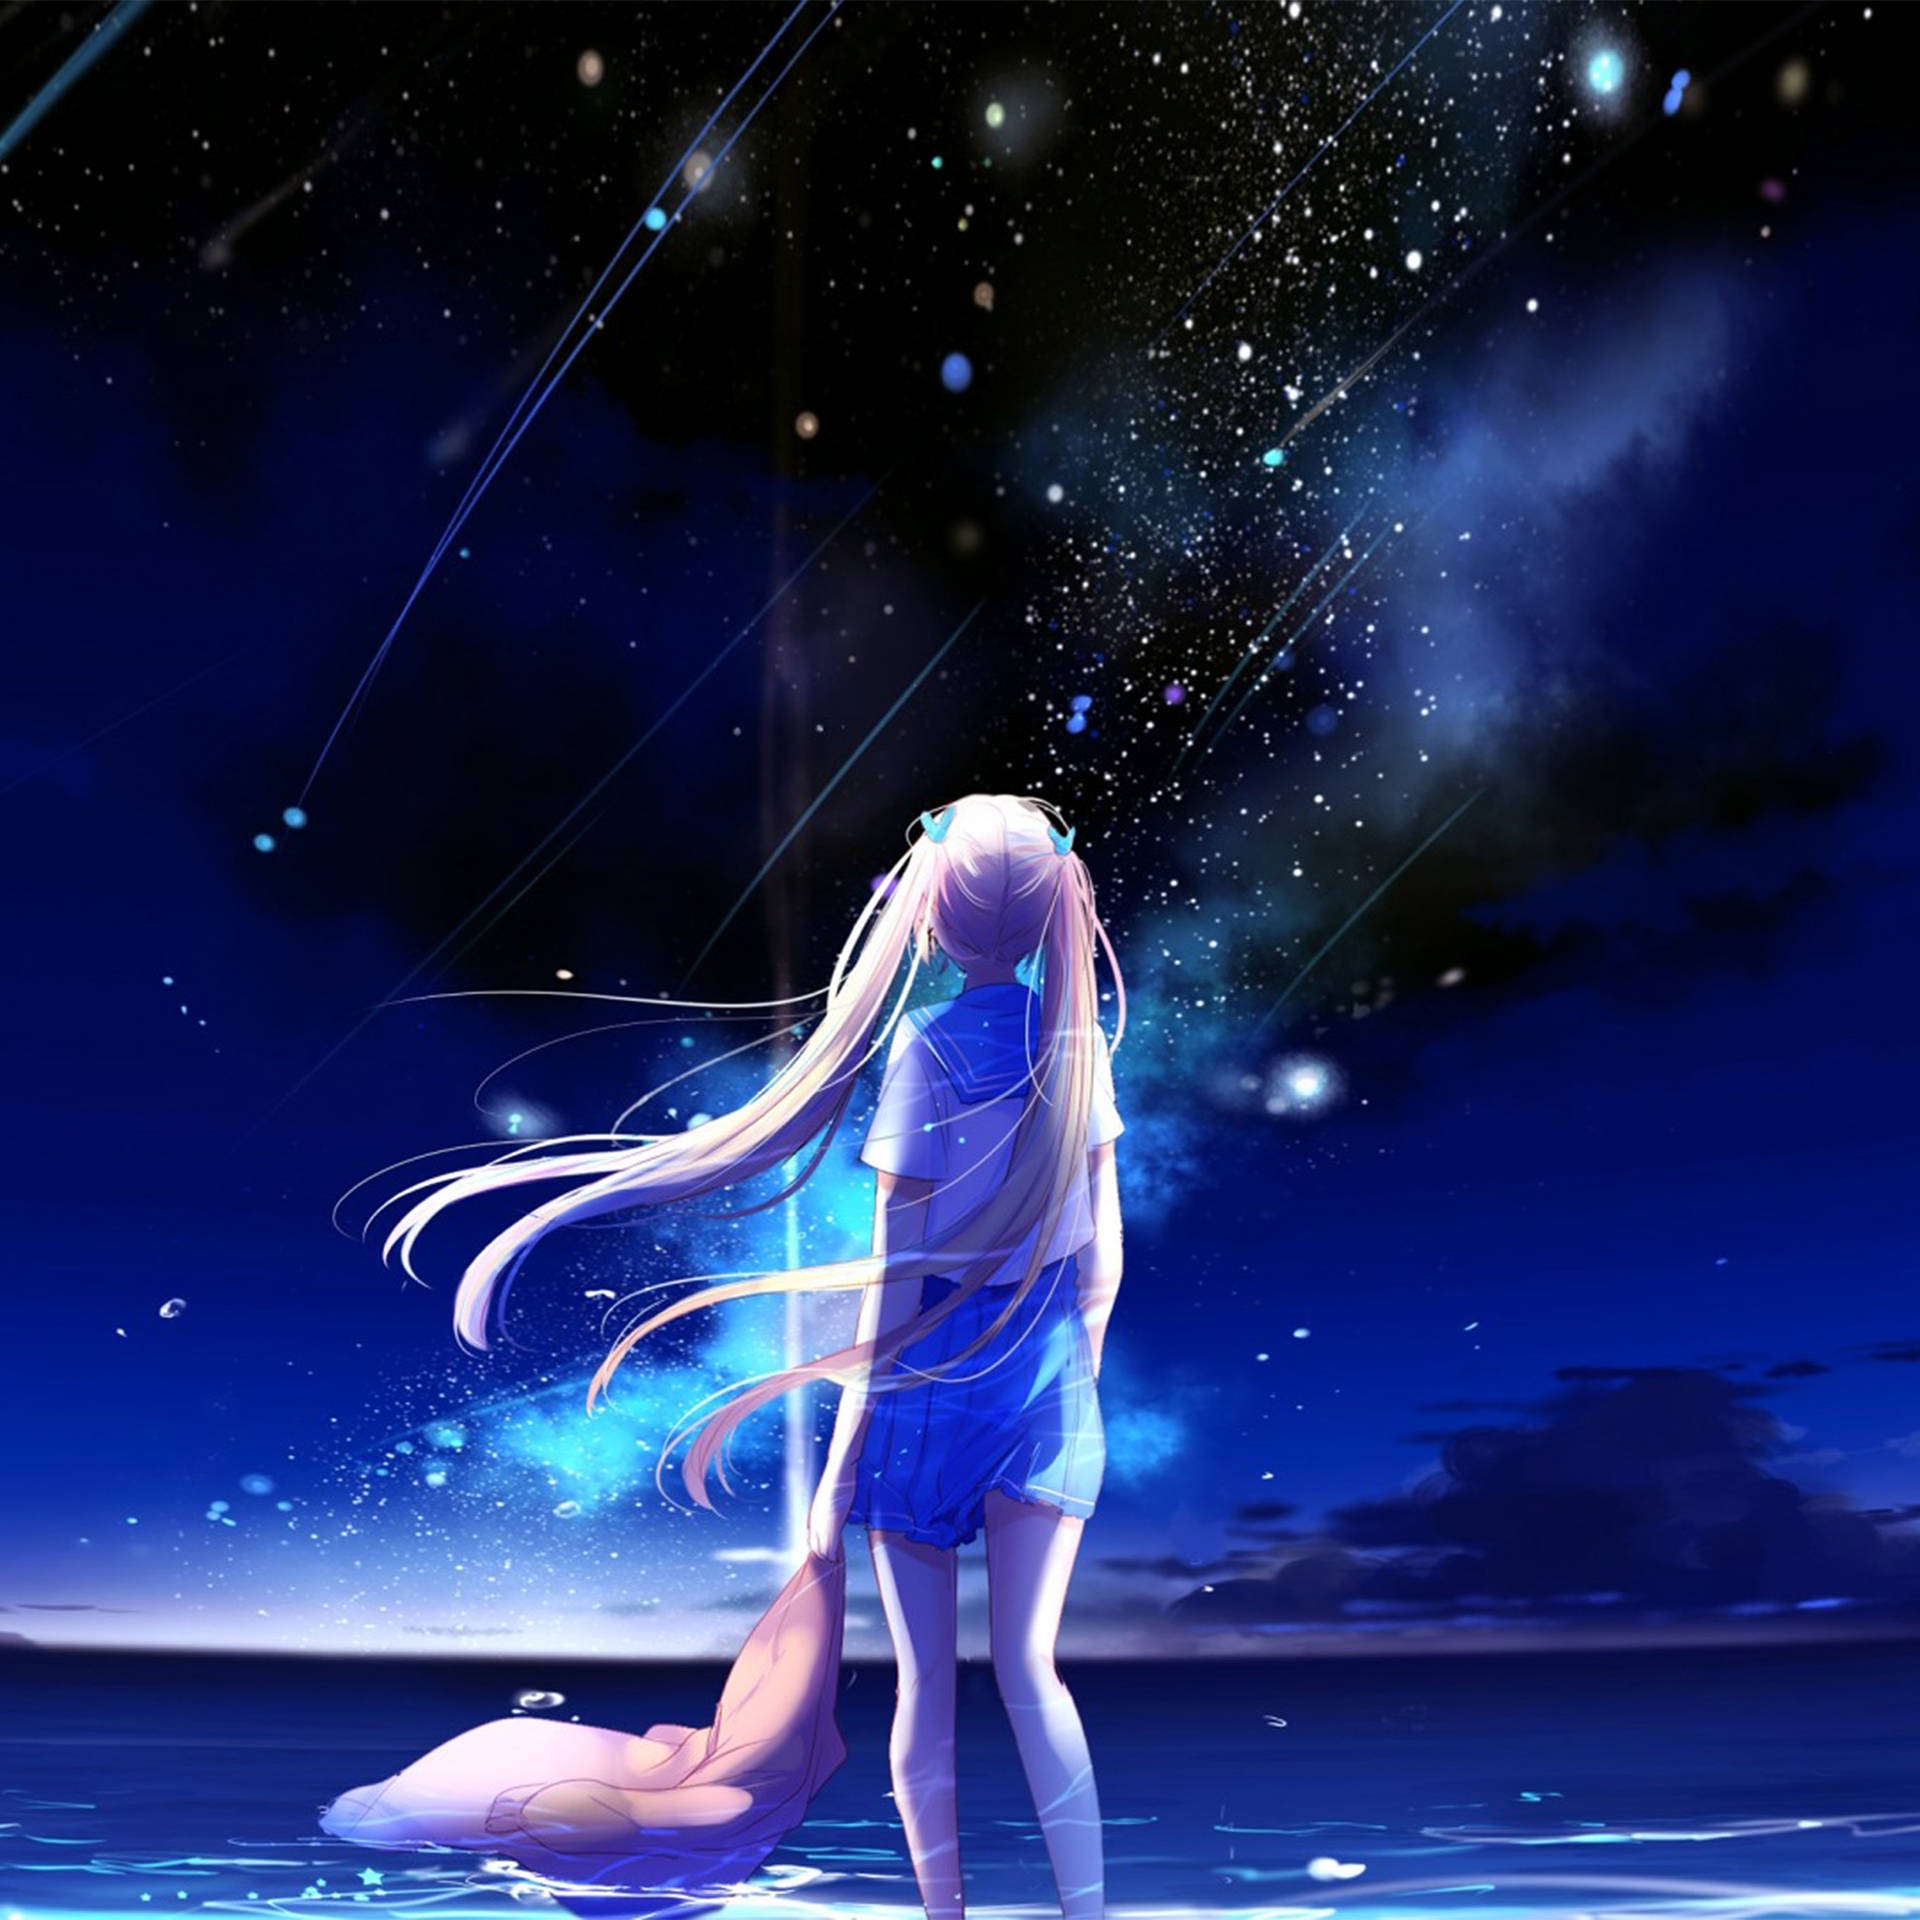 Free Anime Wallpaper Downloads, [5800+] Anime Wallpapers for FREE |  